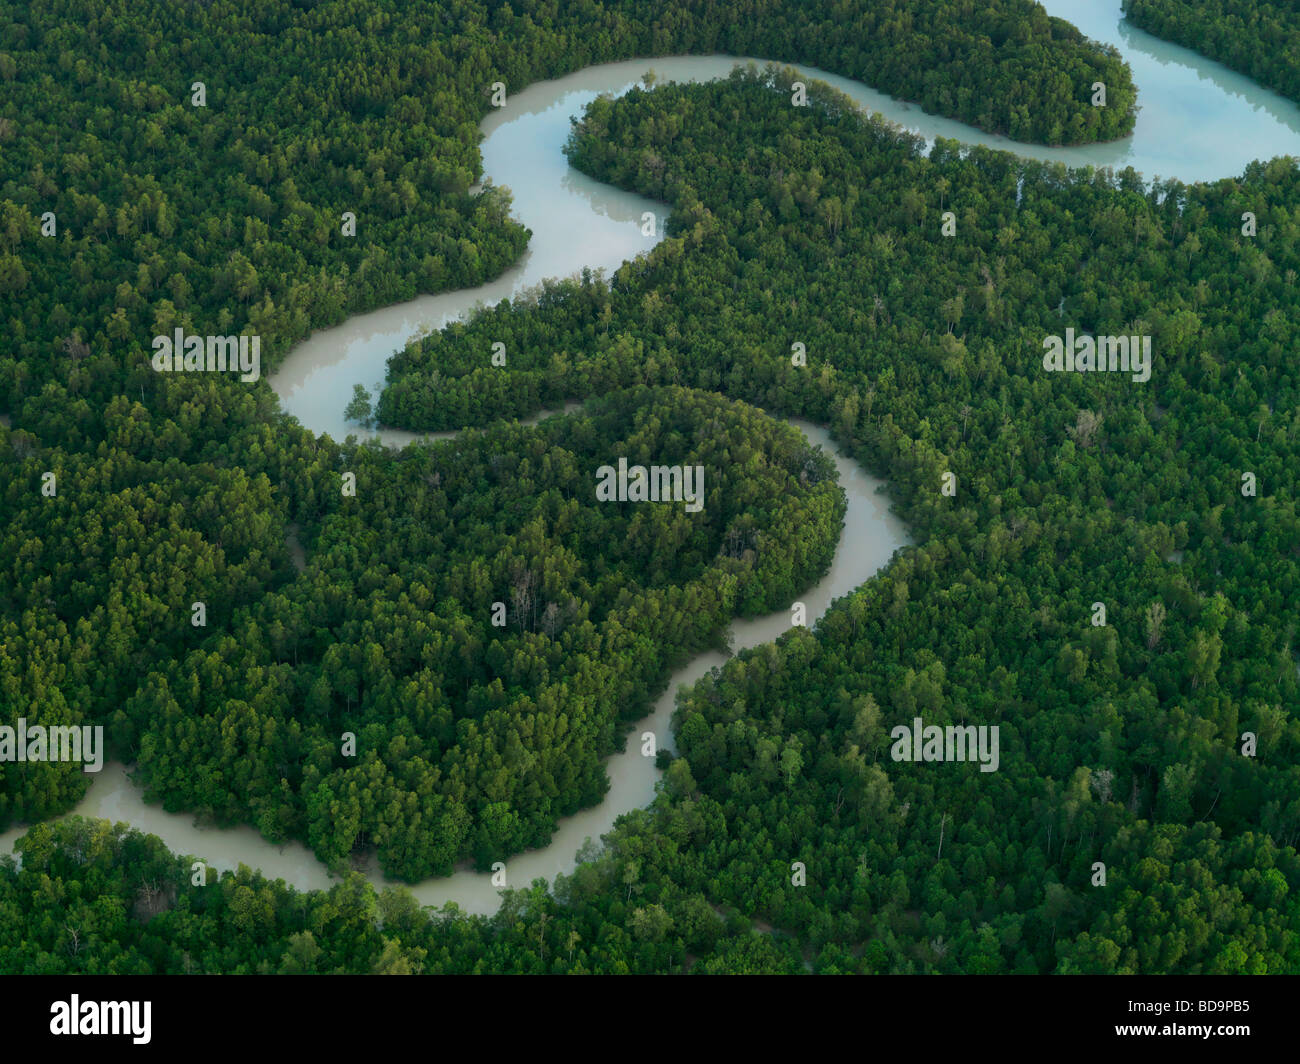 A winding river making its way through Johor's lush countryside Stock Photo